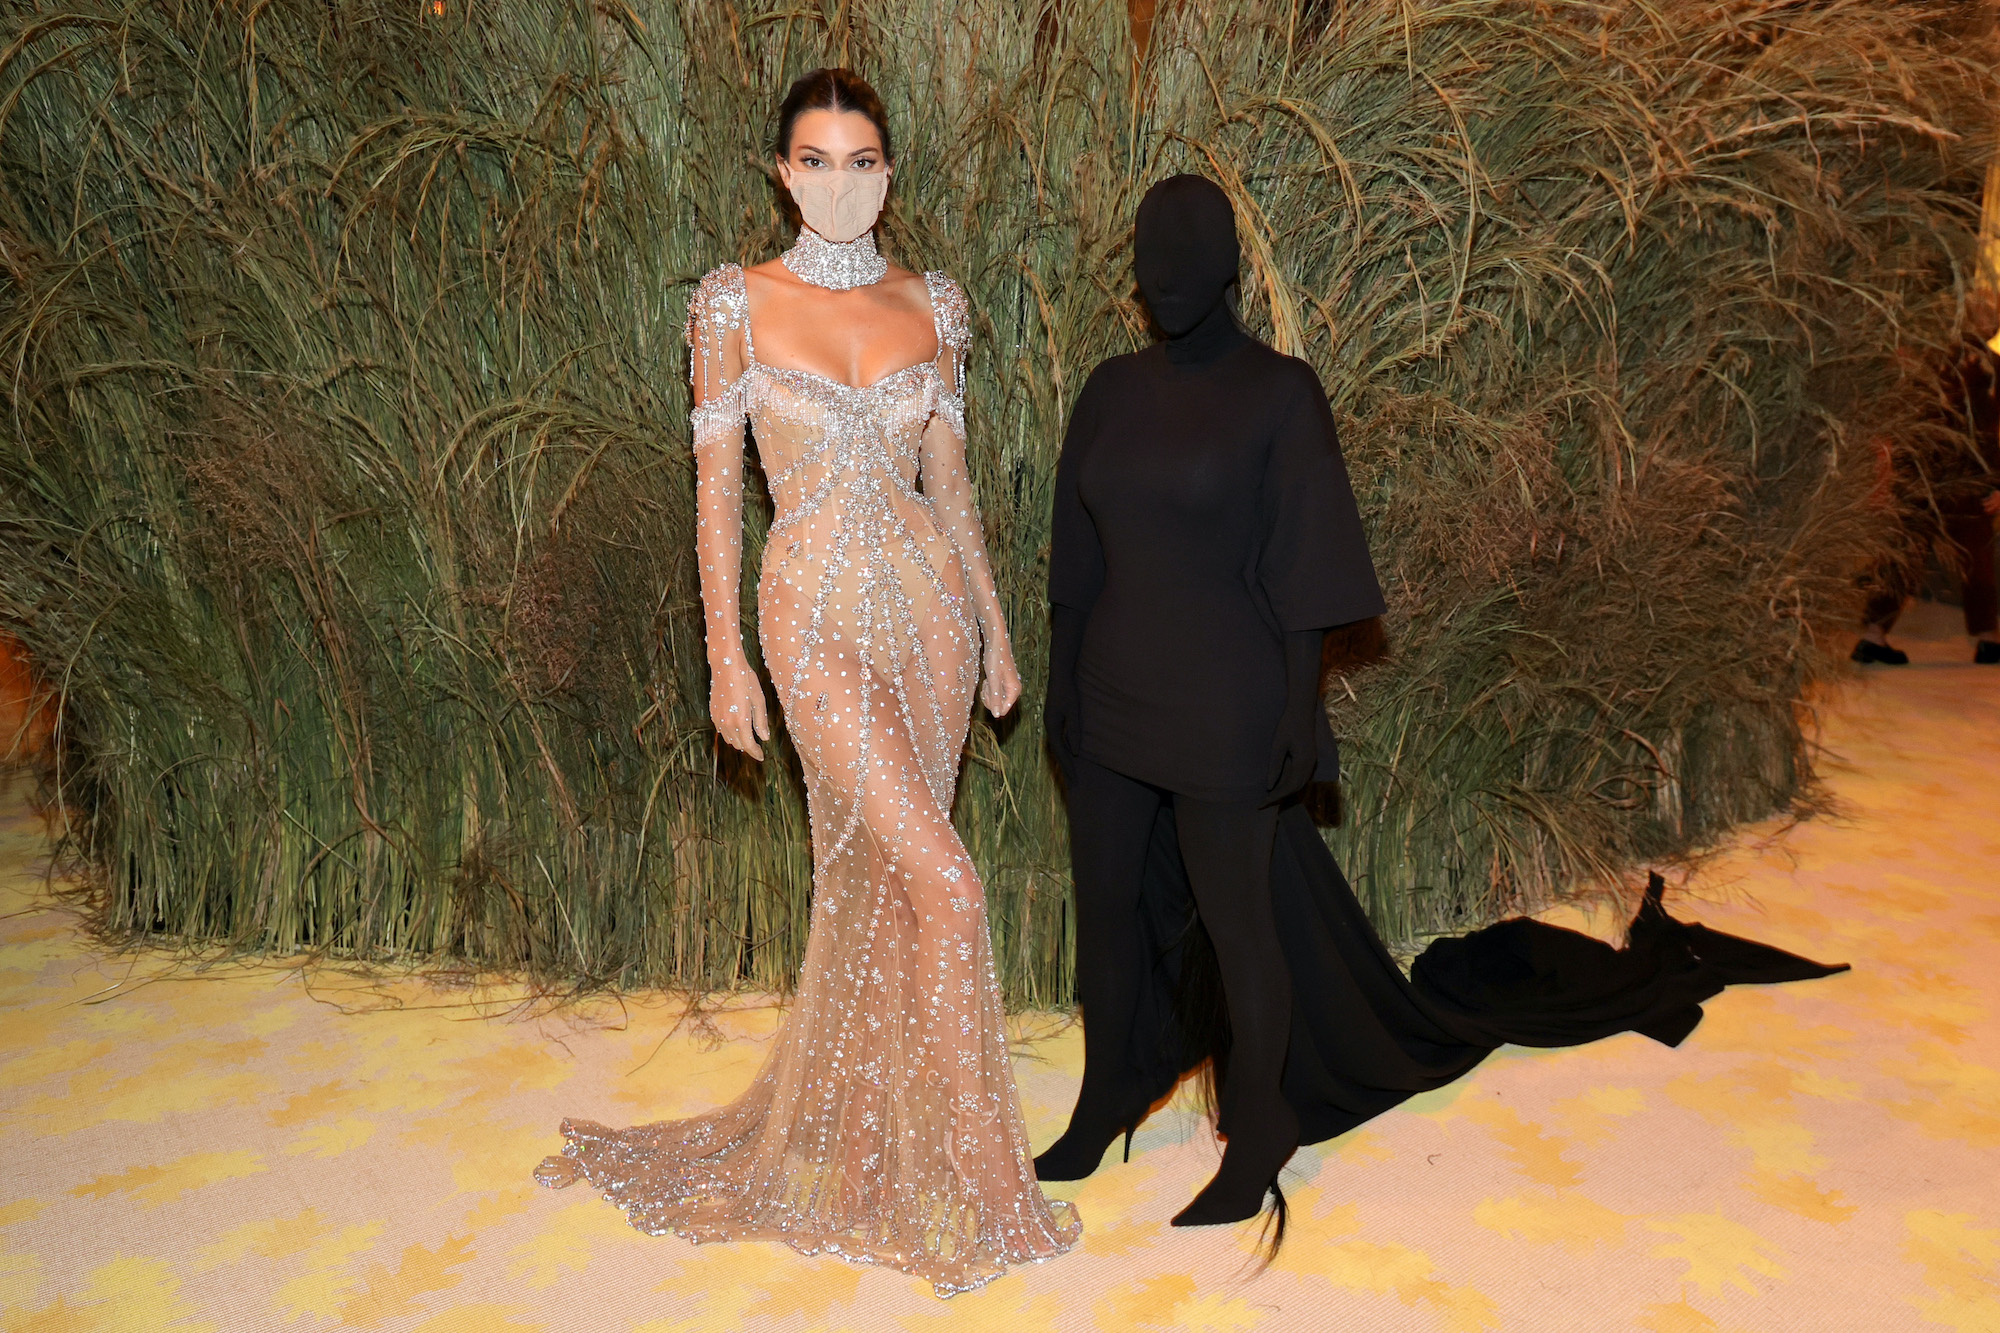 Kendall Jenner in a gown next to Kim Kardashian dressed in a full body t-shirt